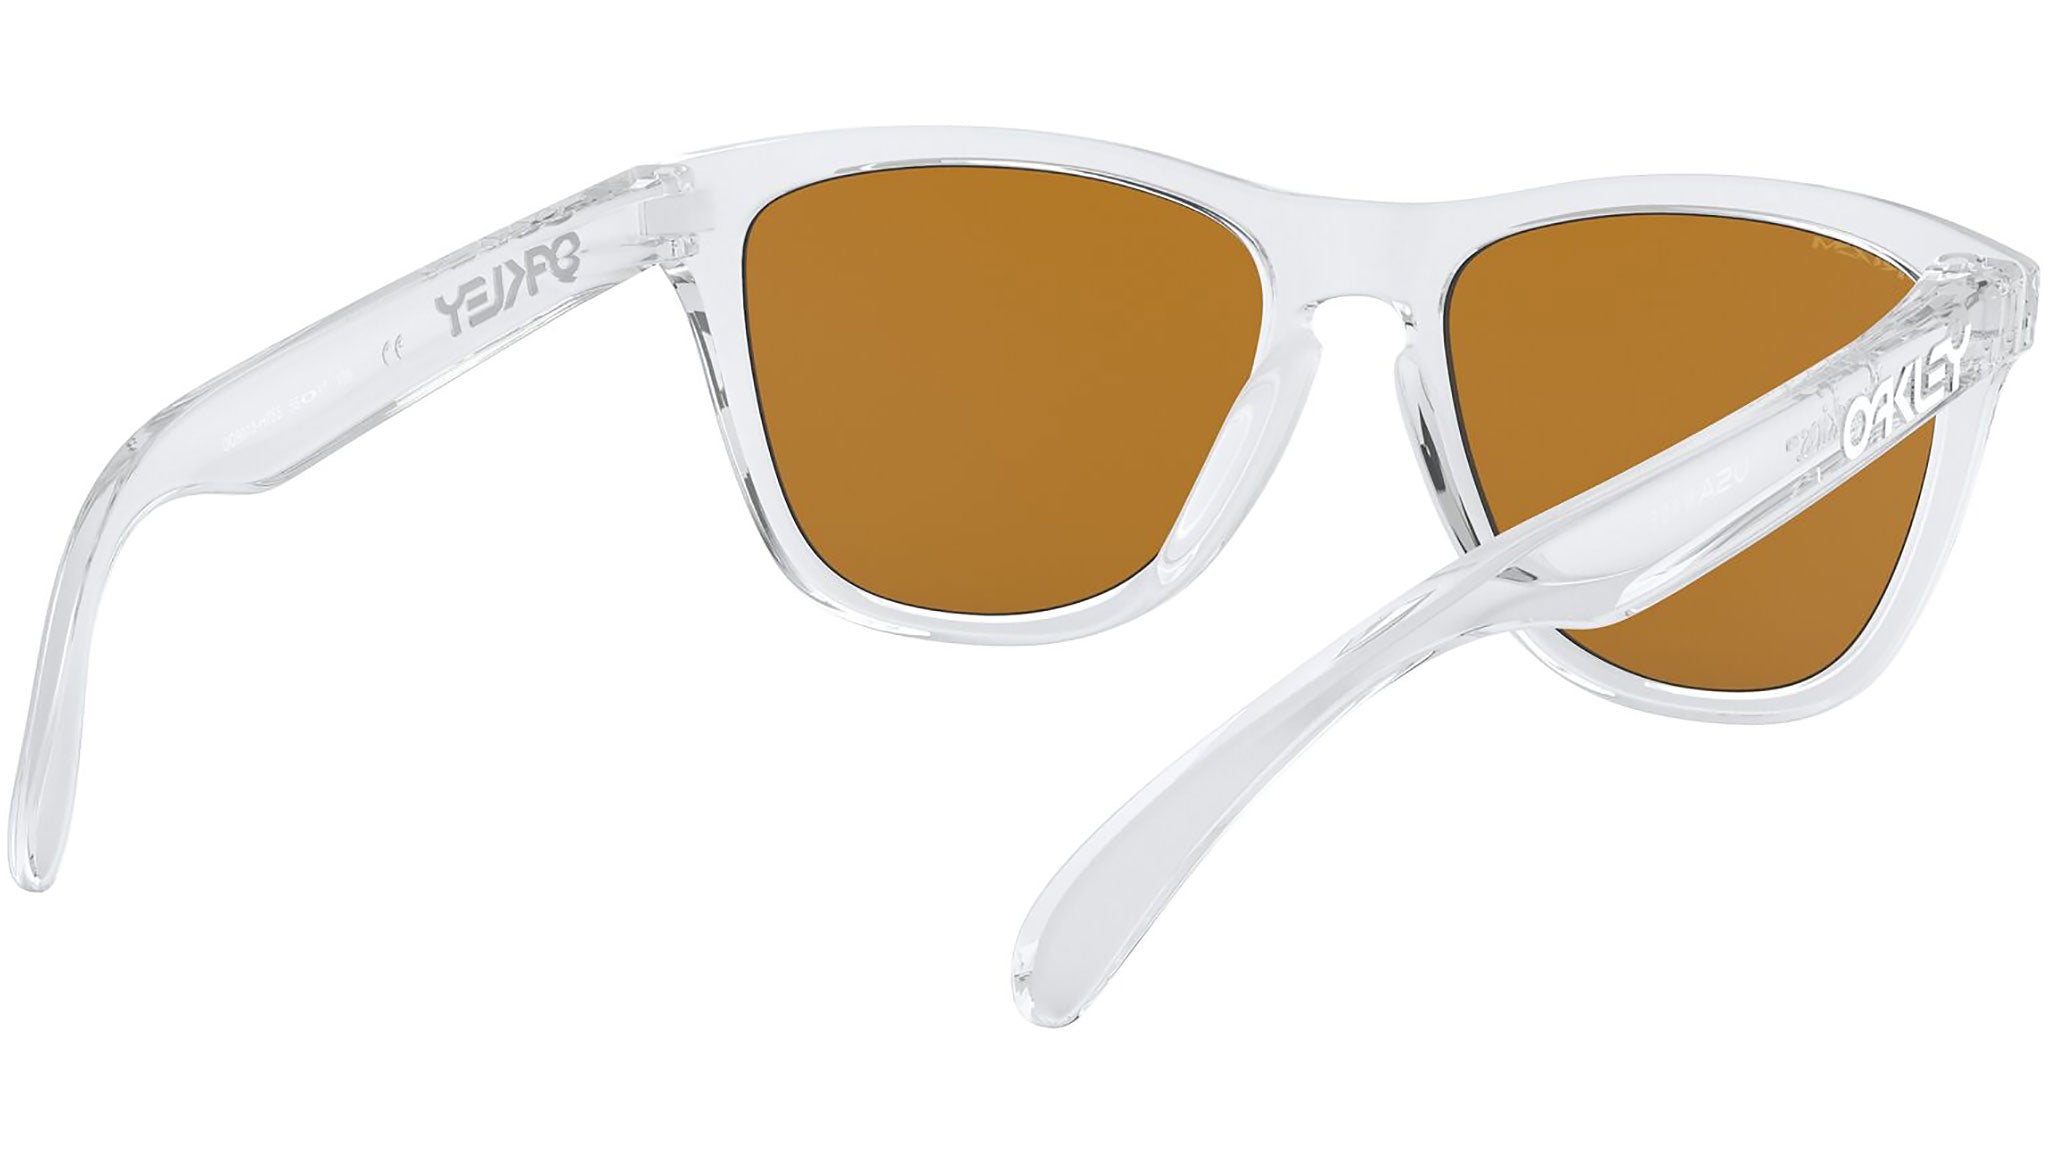 Frogskins OO9013 H7 polished clear